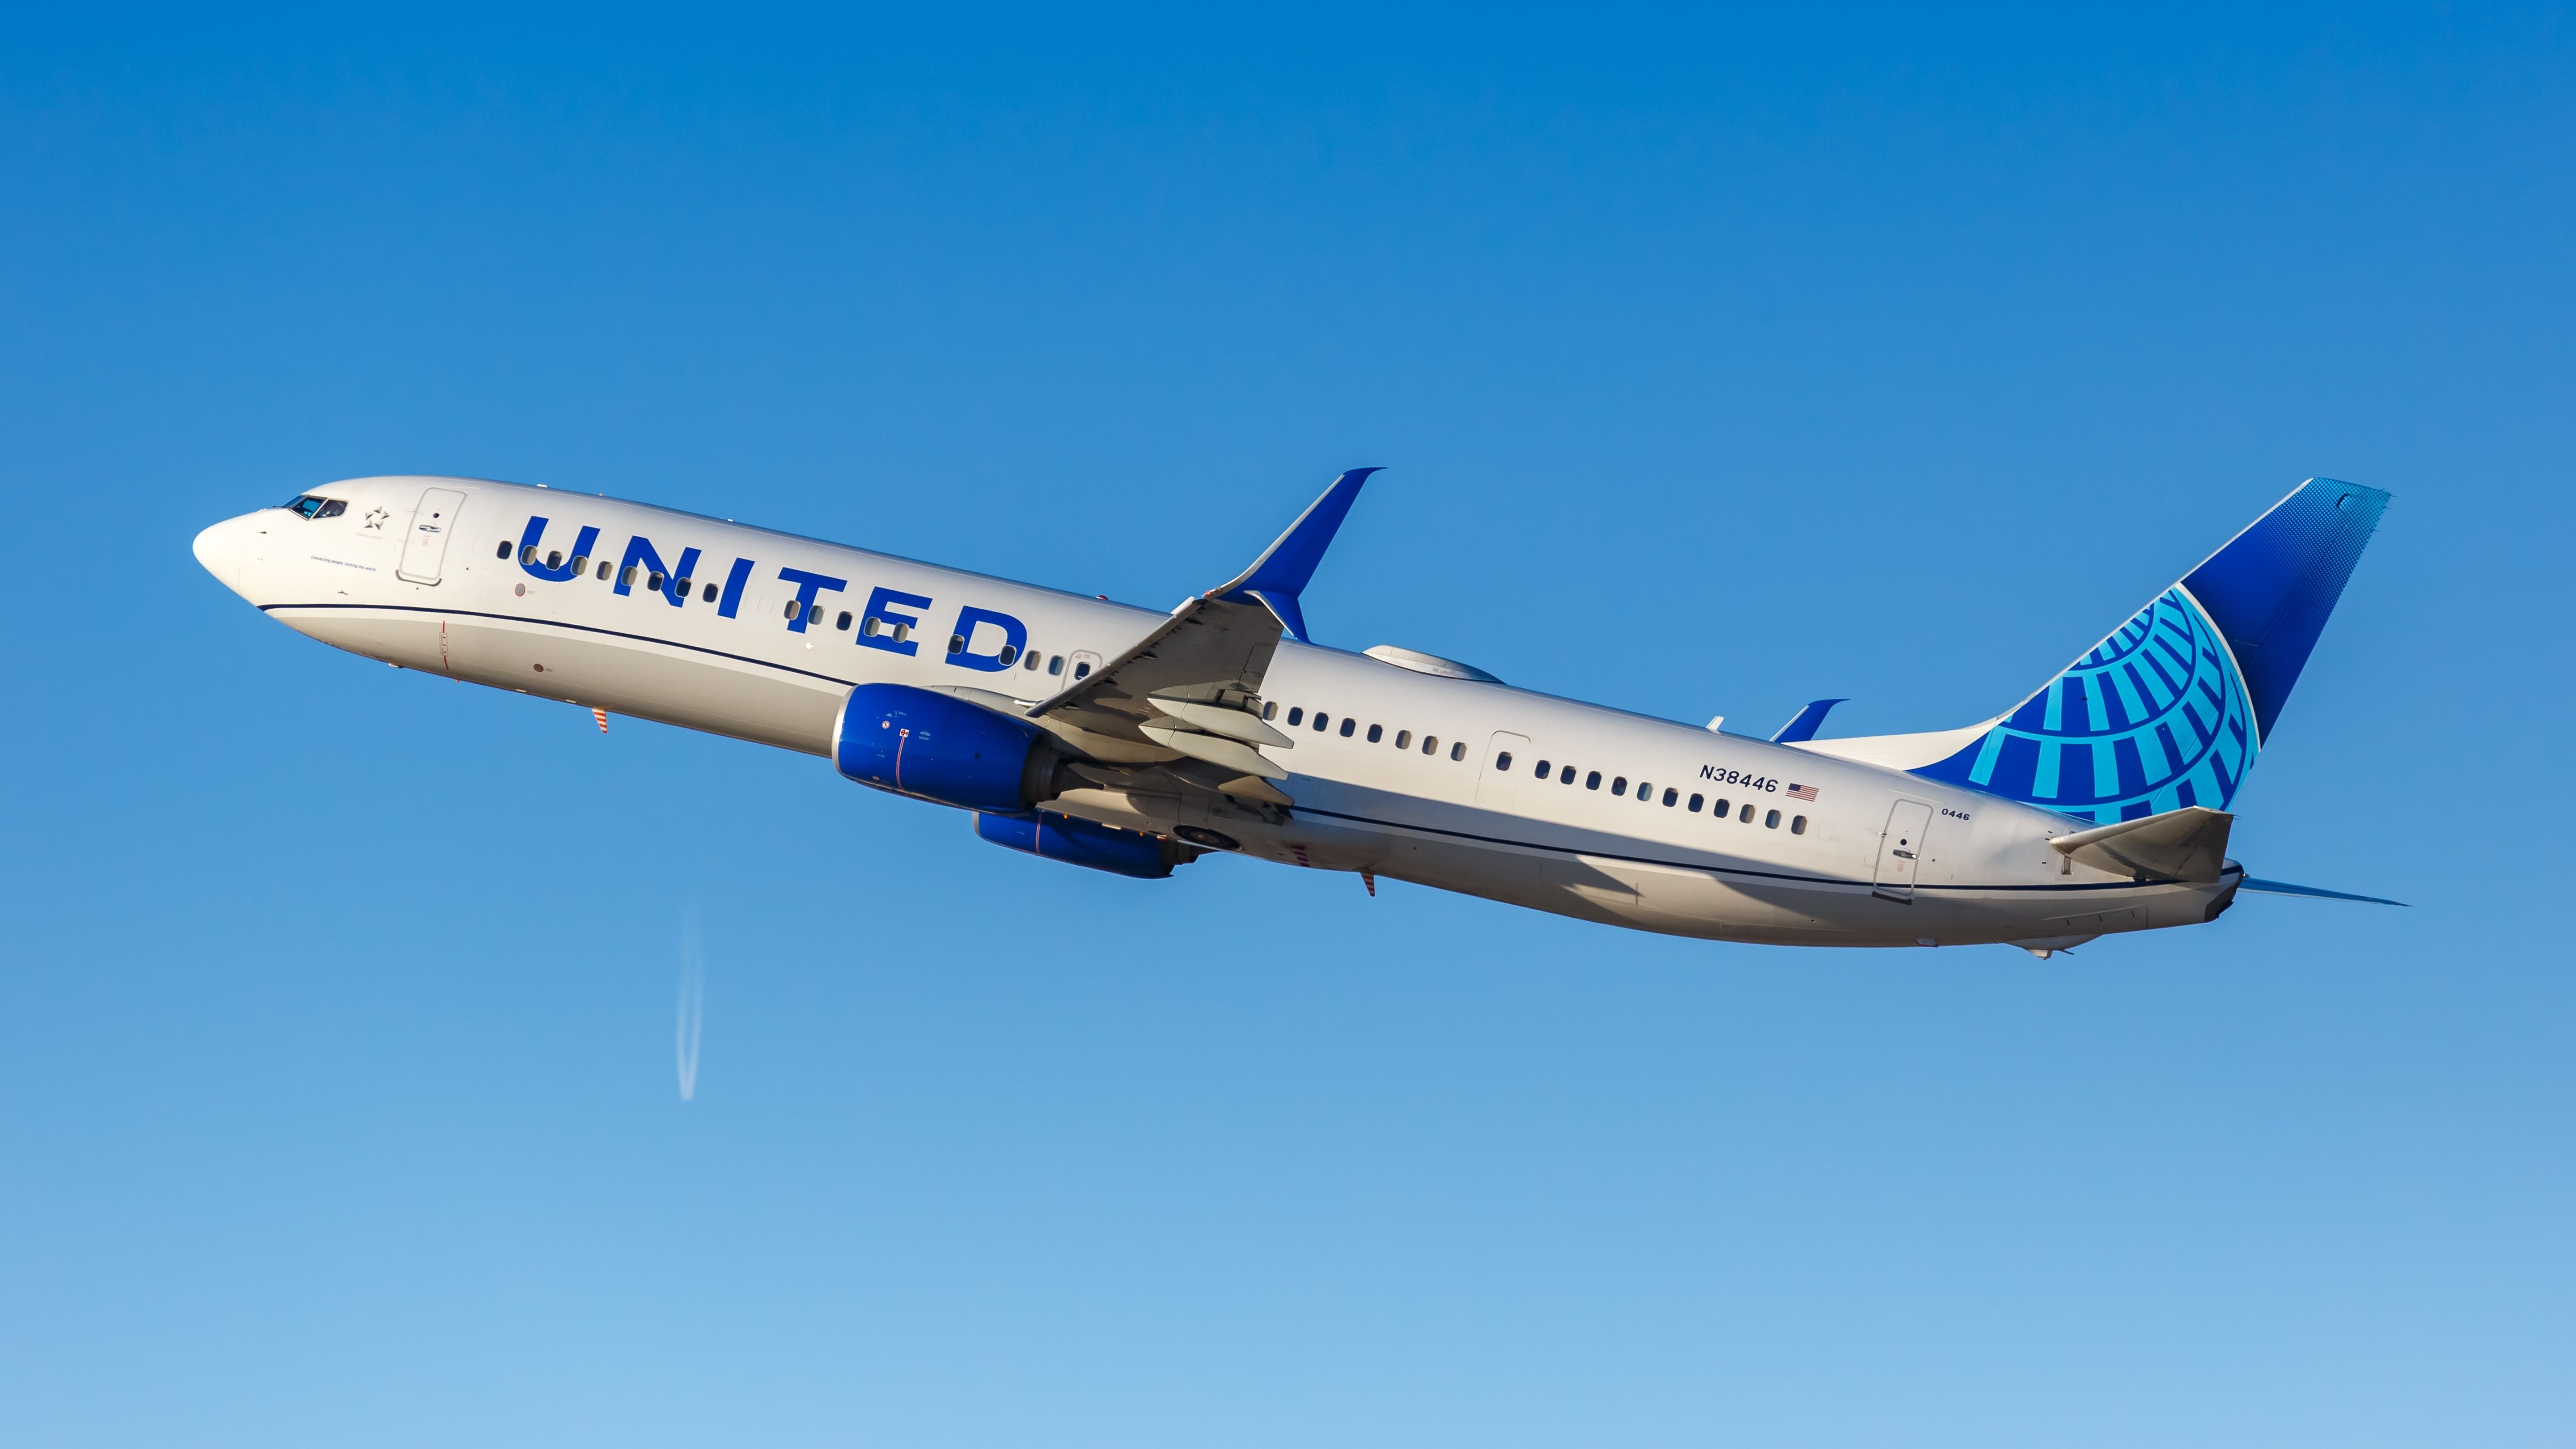 A United Airlines Boeing 737 flying in the sky.